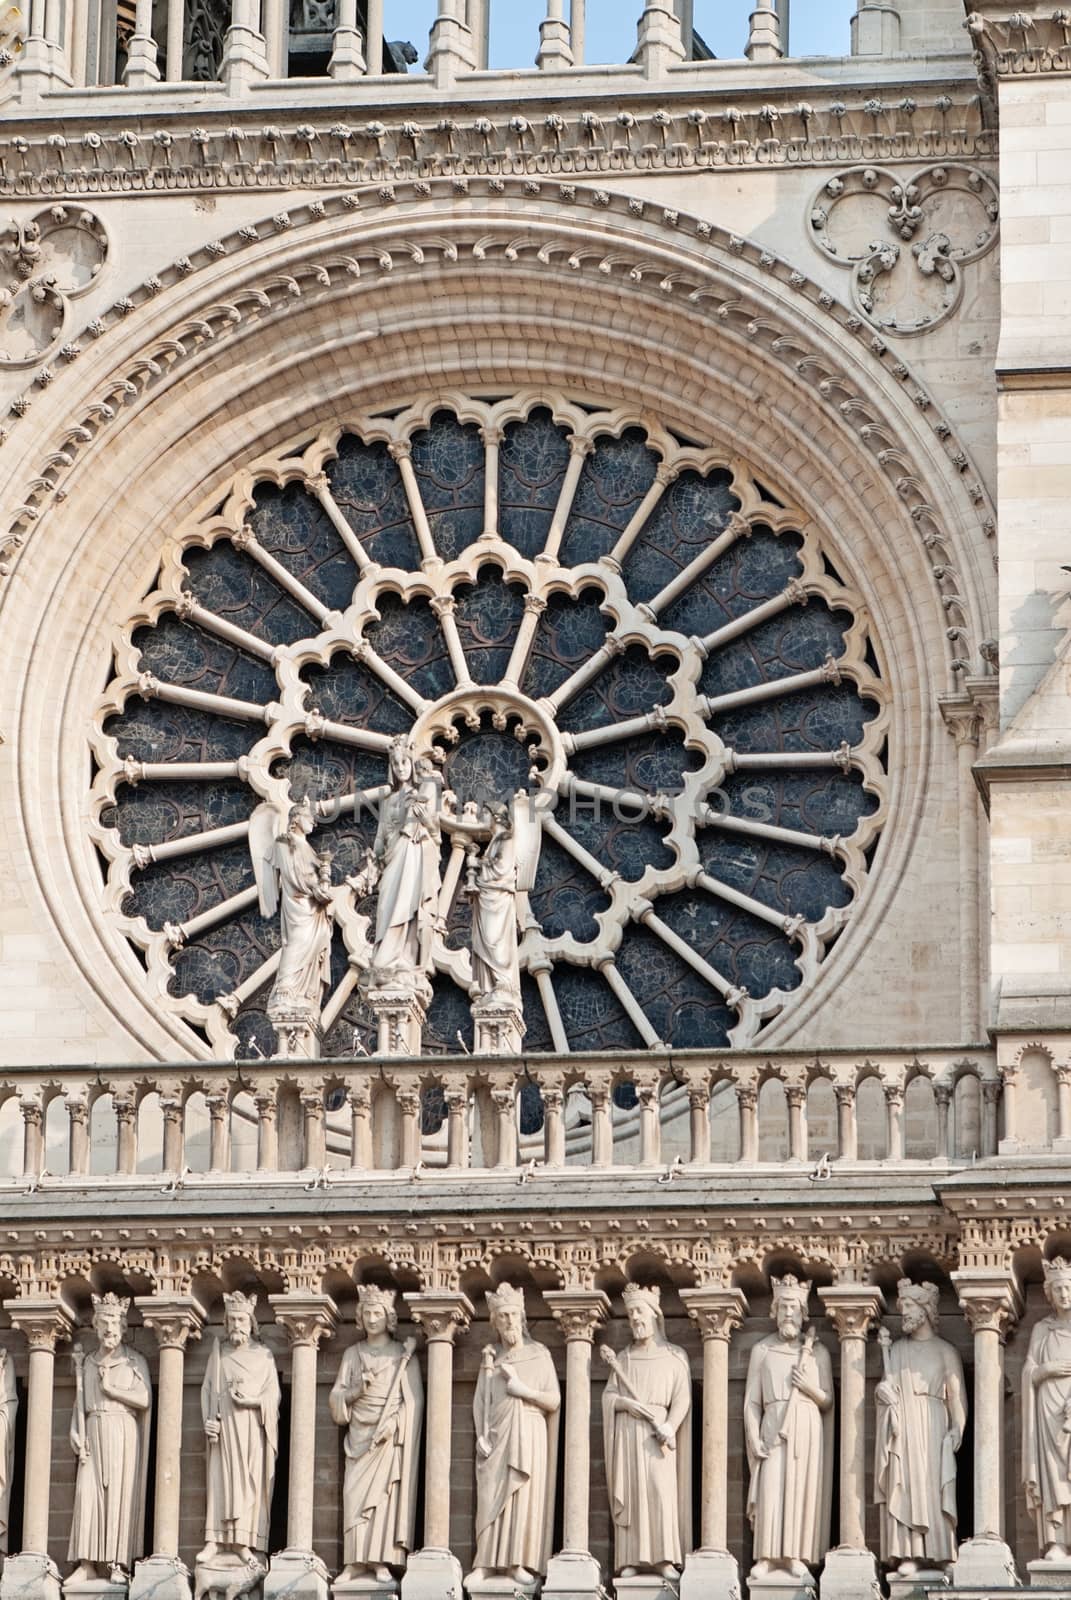 Rosette from Notre Dame Cathedrale by mitakag